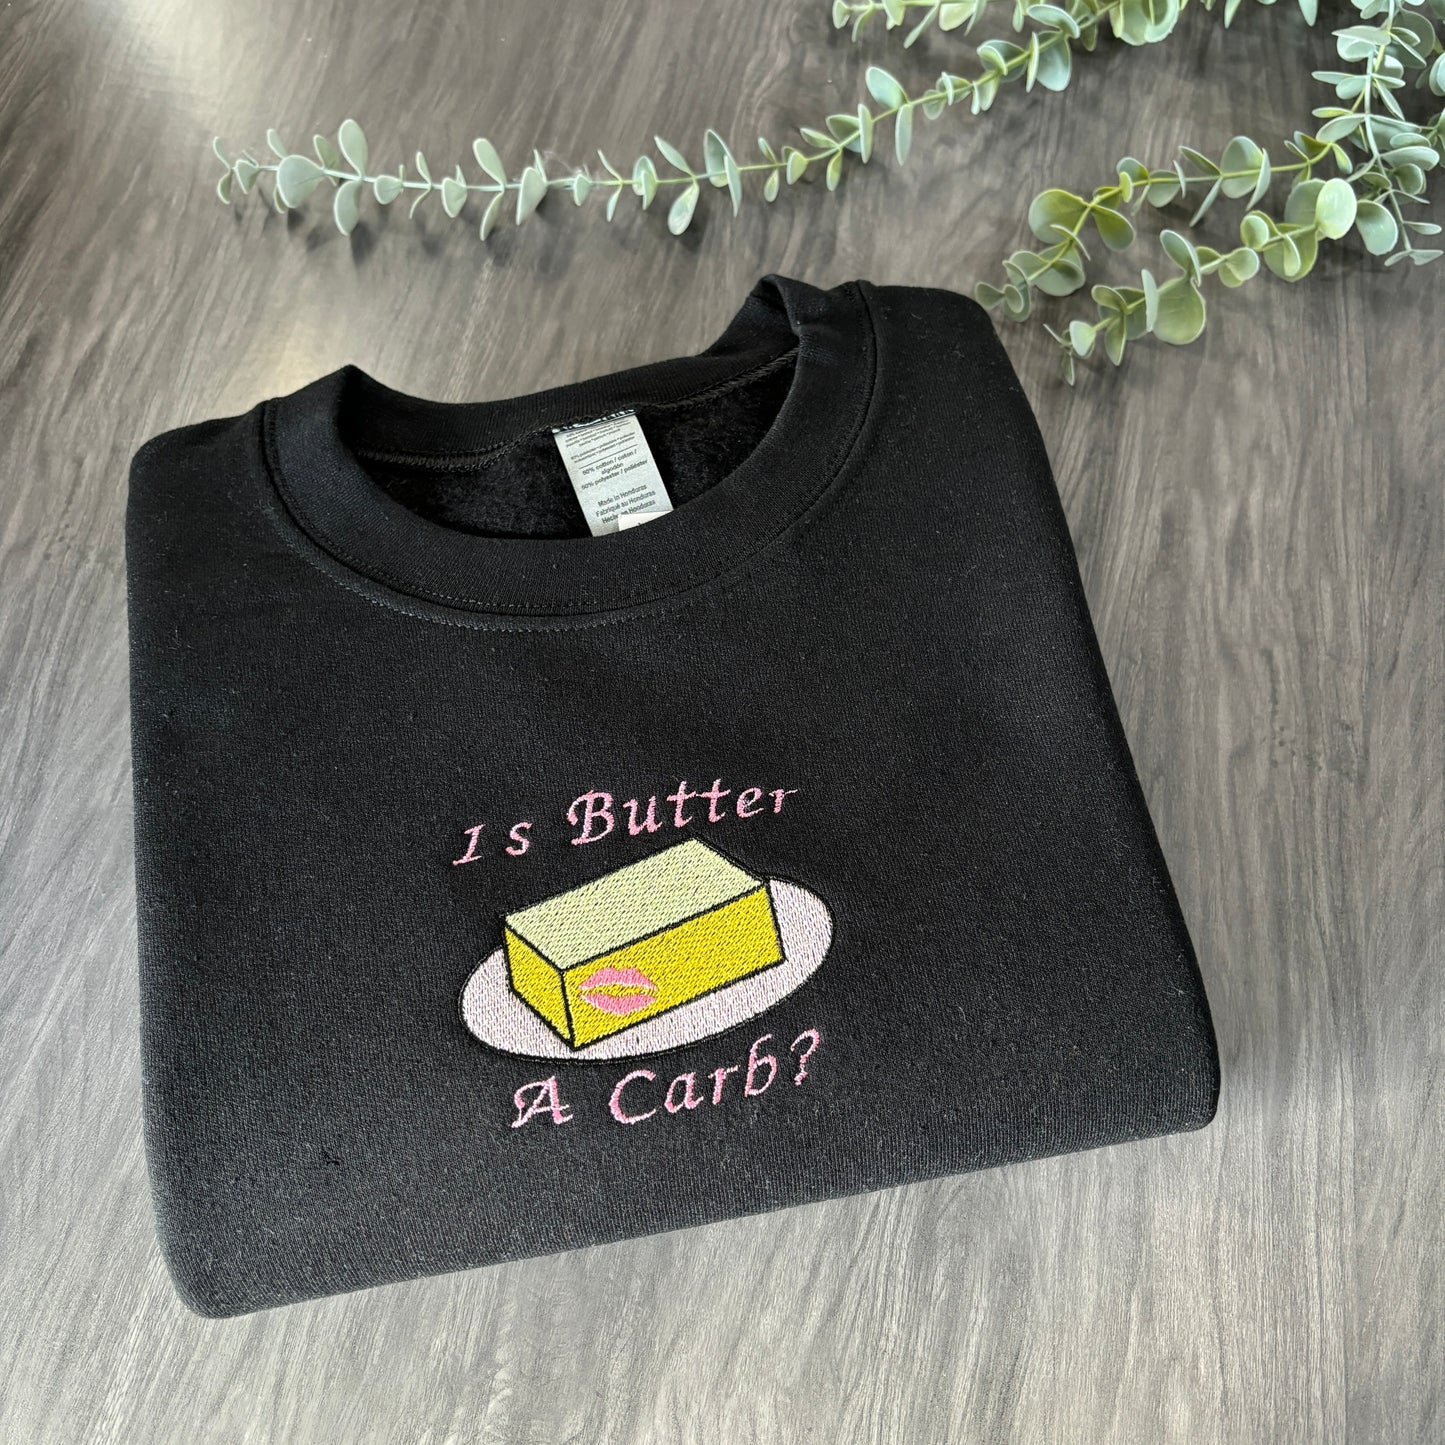 IS BUTTER A CARB EMBROIDERED SWEATSHIRT